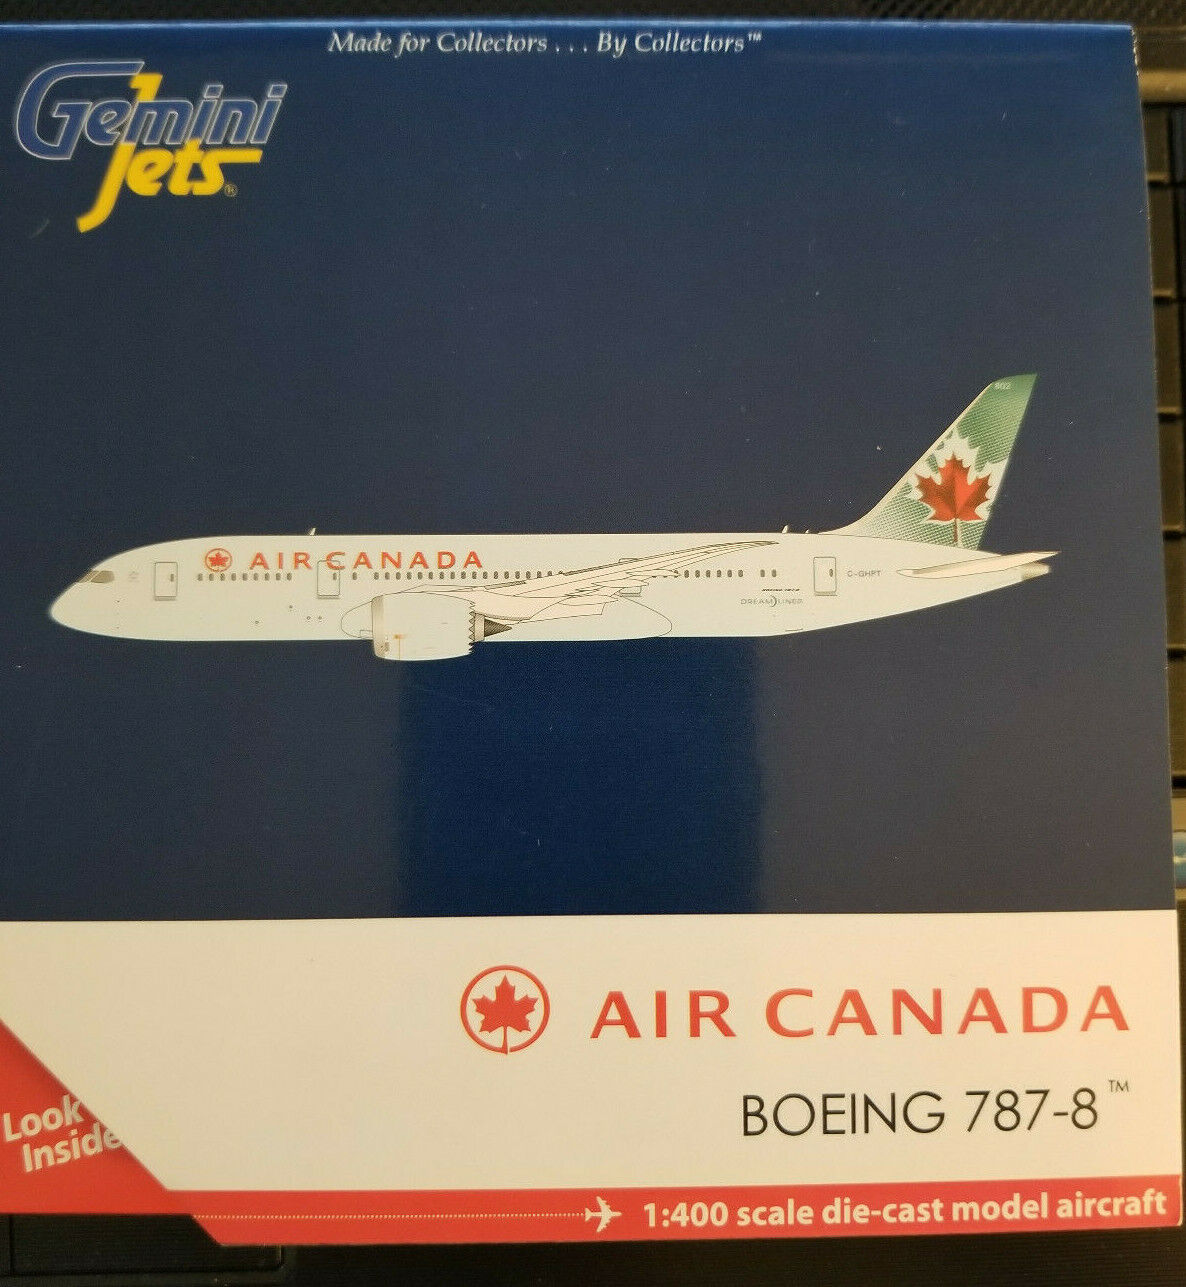 BRAND NEW 1:400 Gemini Jets AIR CANADA 787-8 GJACA1441 Sold Out C-GHPT